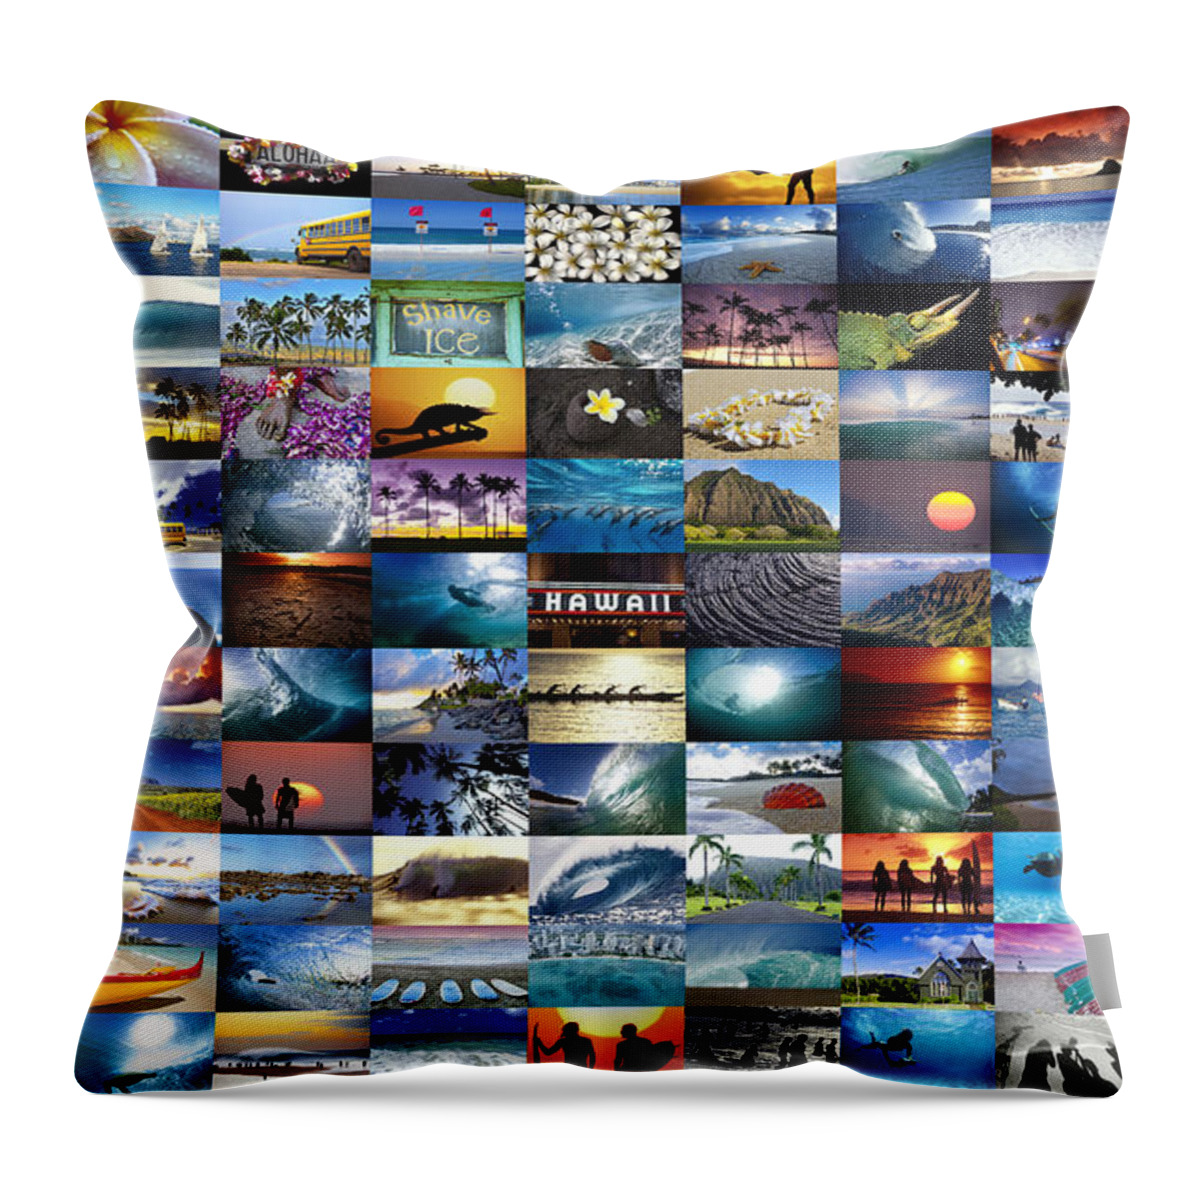 Ocean Throw Pillow featuring the photograph One Hawaiian Mixed Plate by Sean Davey